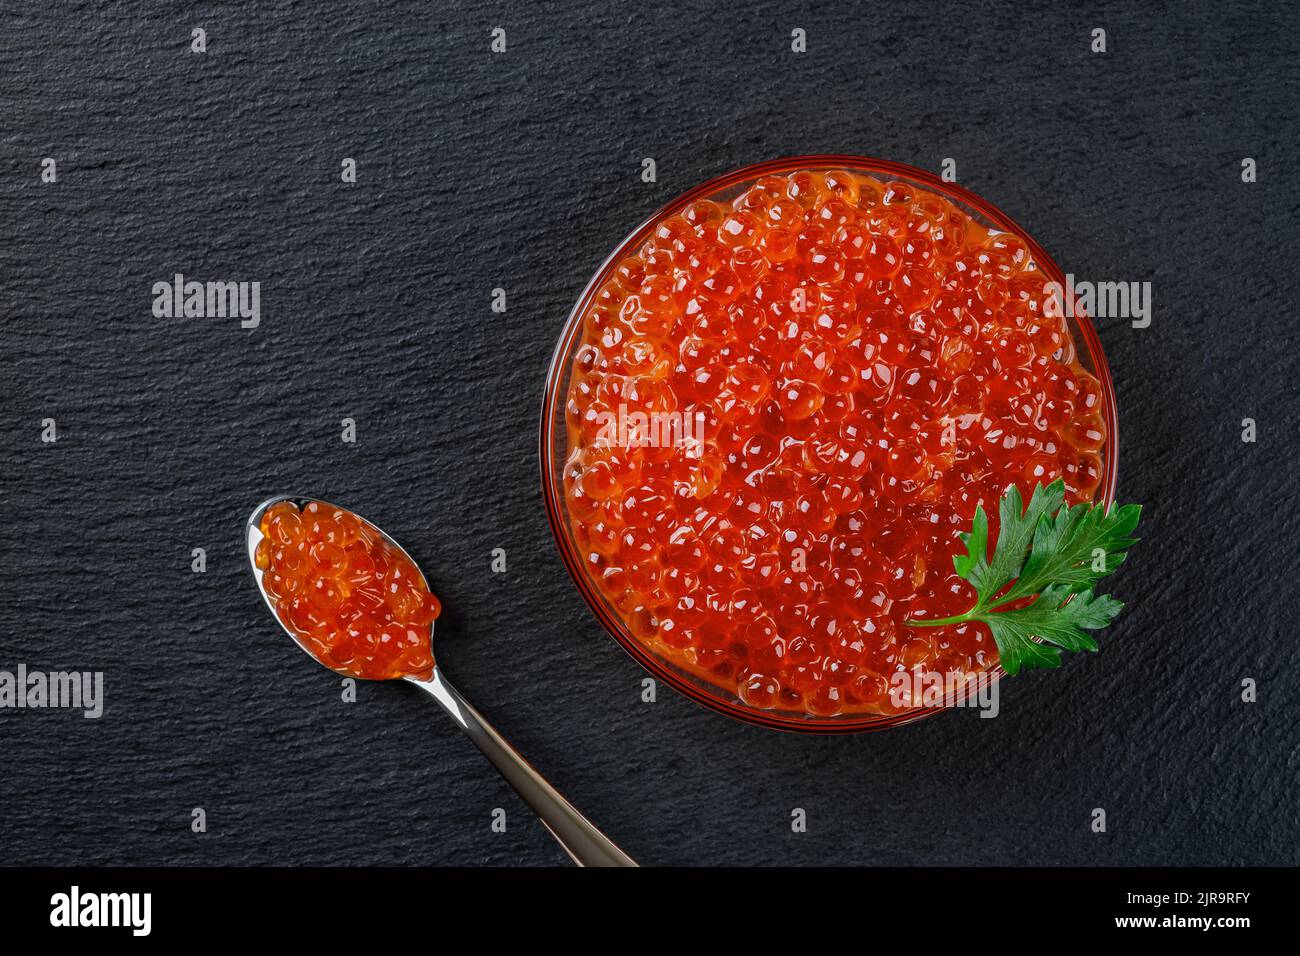 Delicious salmon caviar in a glass bowl over black slate background. Close-up of bowl and spoon full of trout red caviar. Salted salmon roe. Top view. Stock Photo